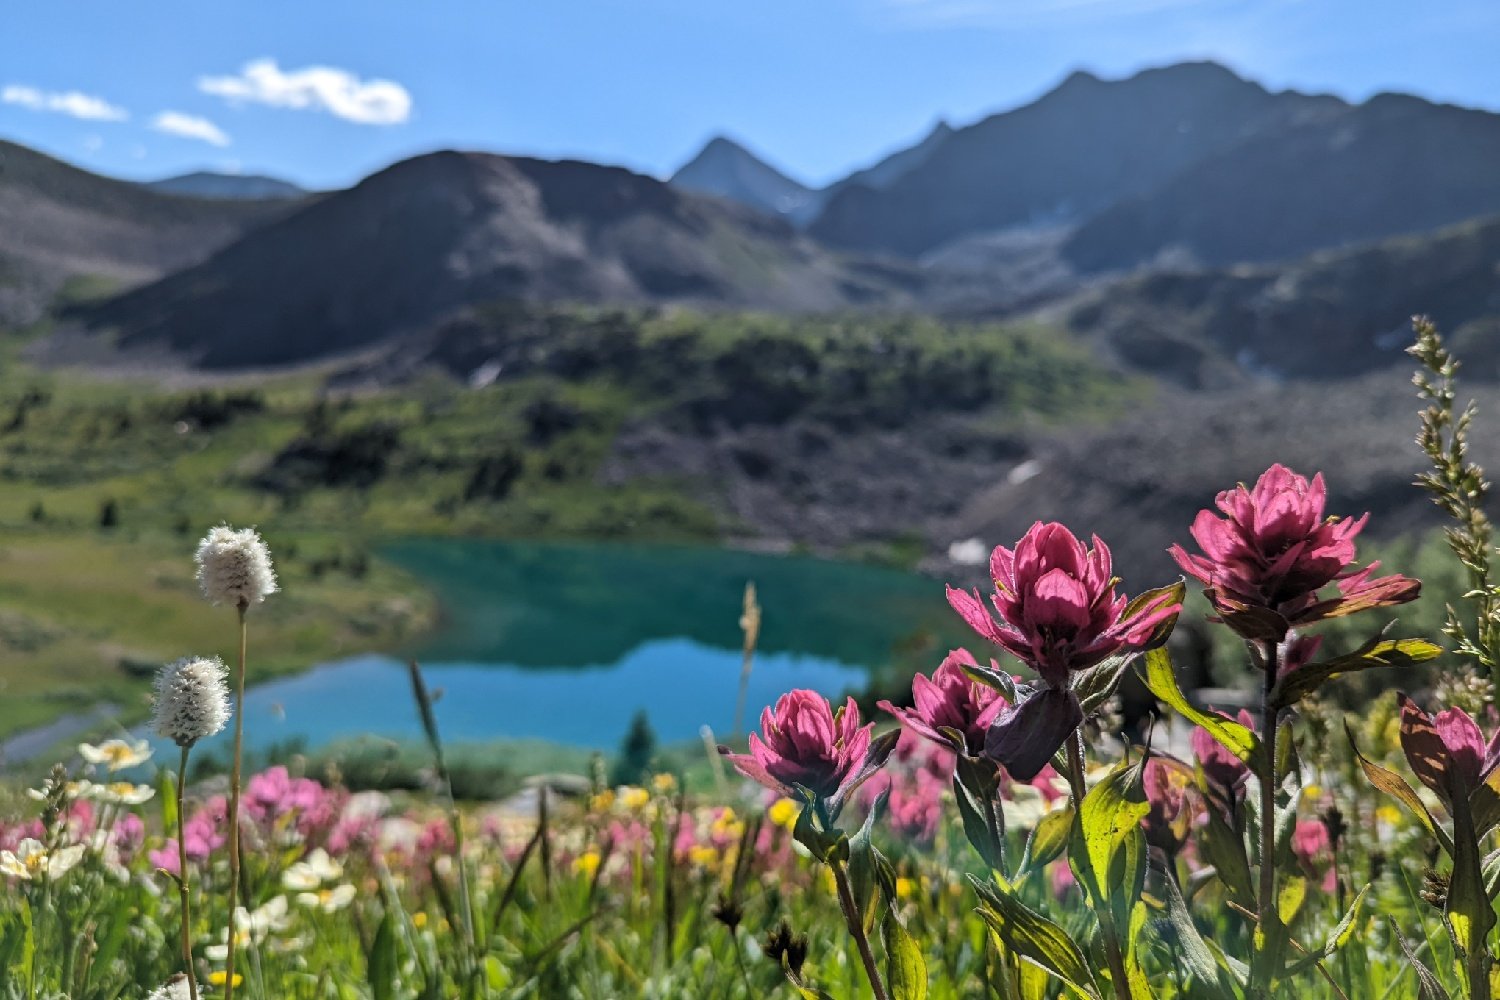 Wildflowers in the foreground and Lake Ann in the background on the Colorado Trail